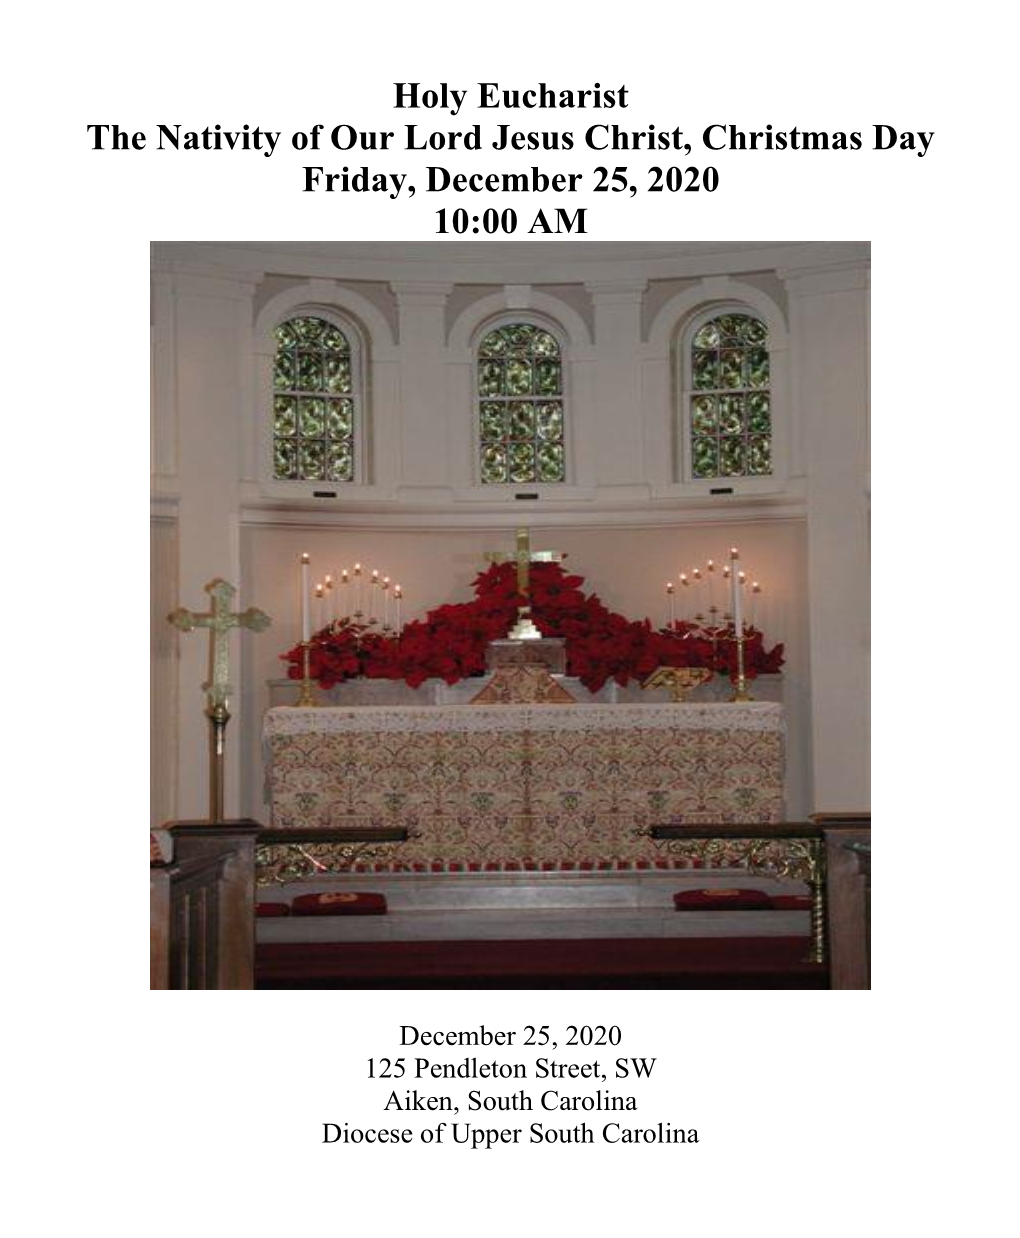 Holy Eucharist the Nativity of Our Lord Jesus Christ, Christmas Day Friday, December 25, 2020 10:00 AM